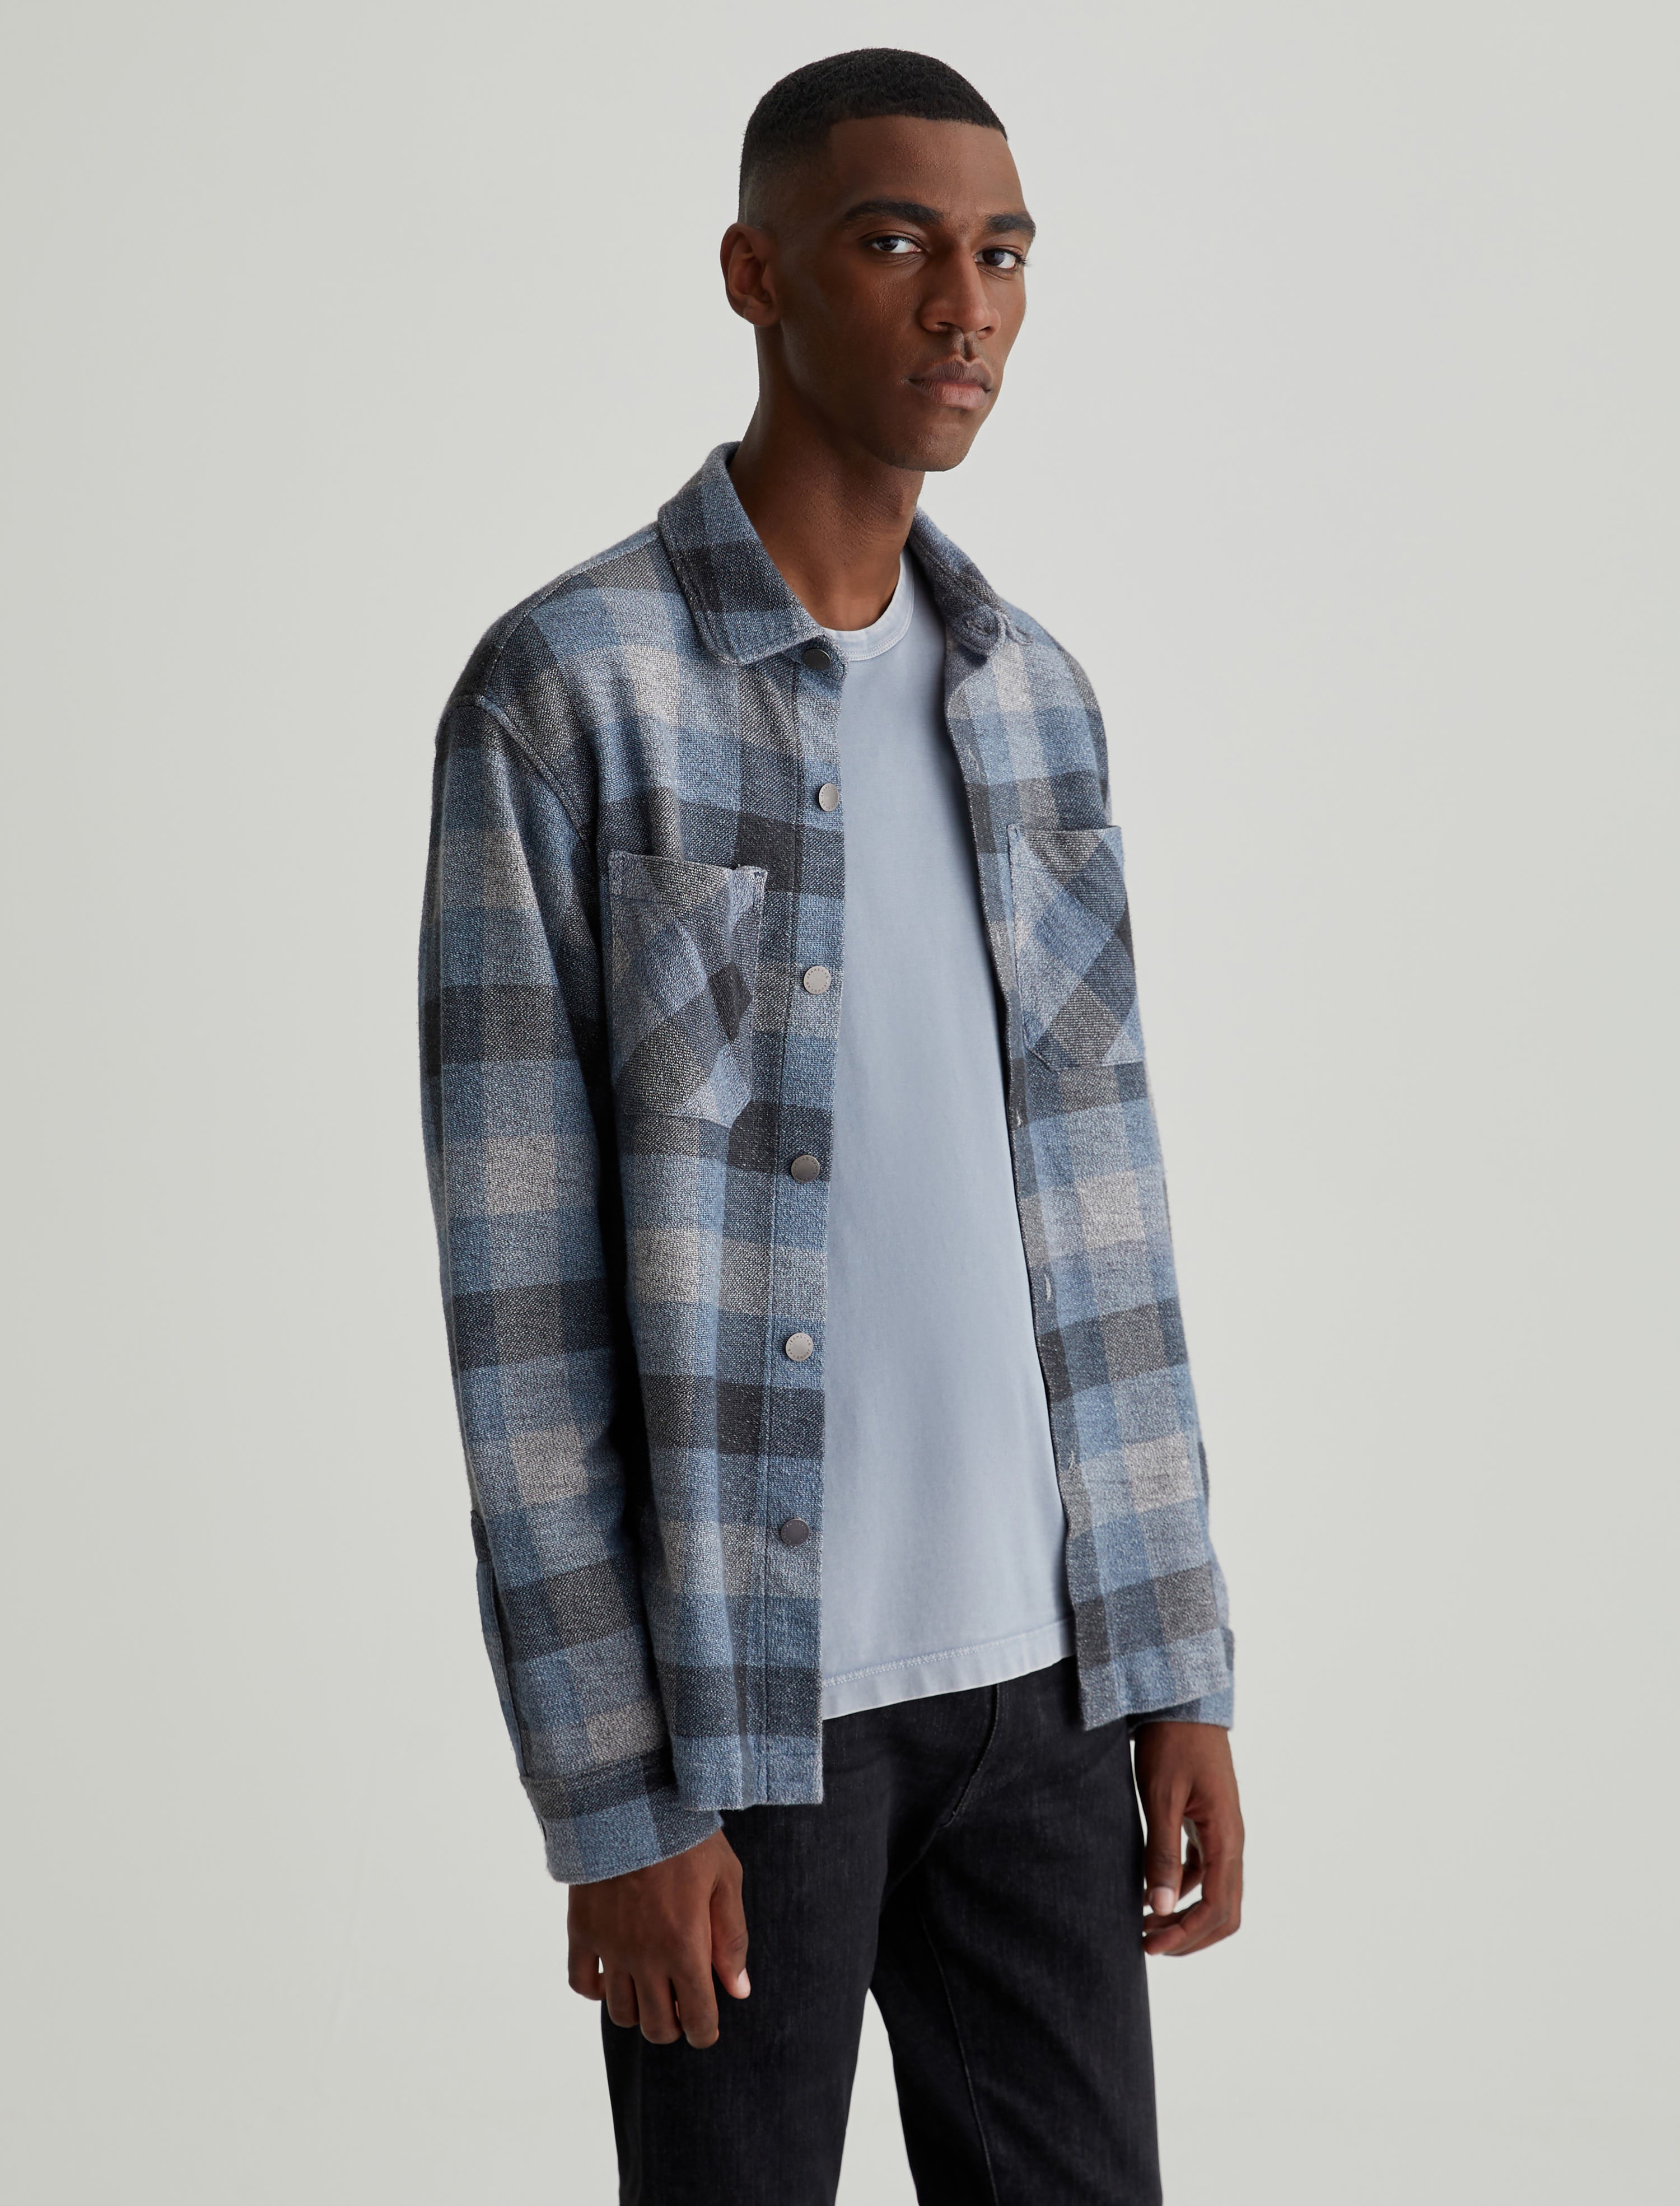 Tailored Fit Grey Navy Check Jacket | Buy Online at Moss